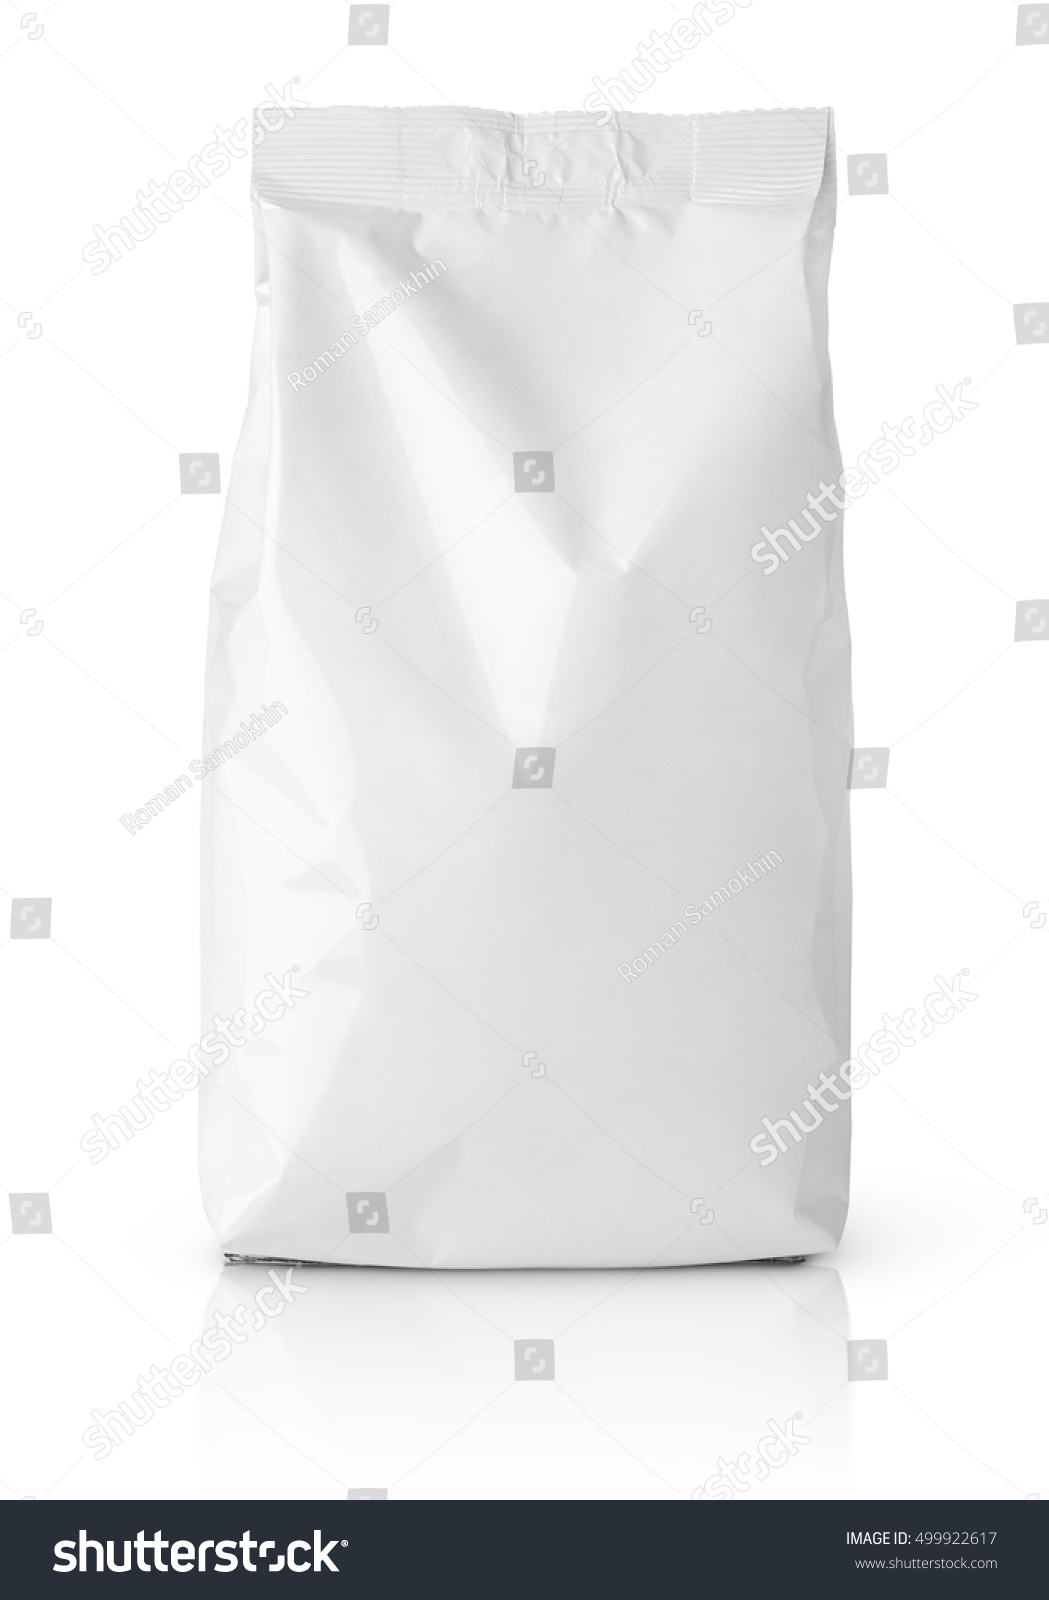 Front view of blank snack paper bag package isolated on white with clipping path #499922617